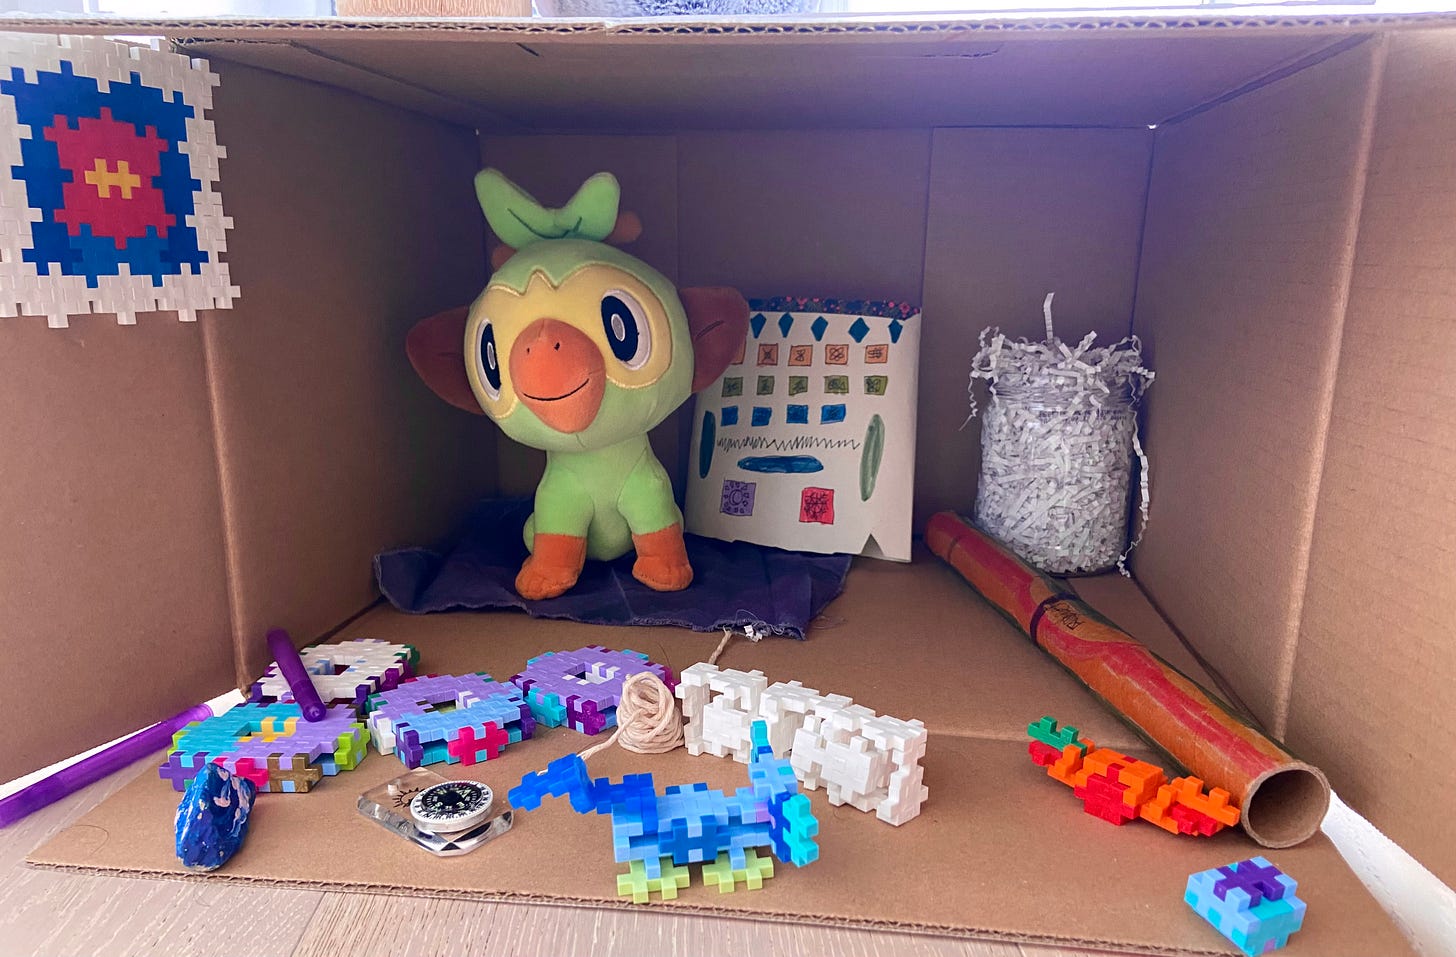 Grookey pokemon stuffed animal in cardboard box with other objects laid out like wares in a shop